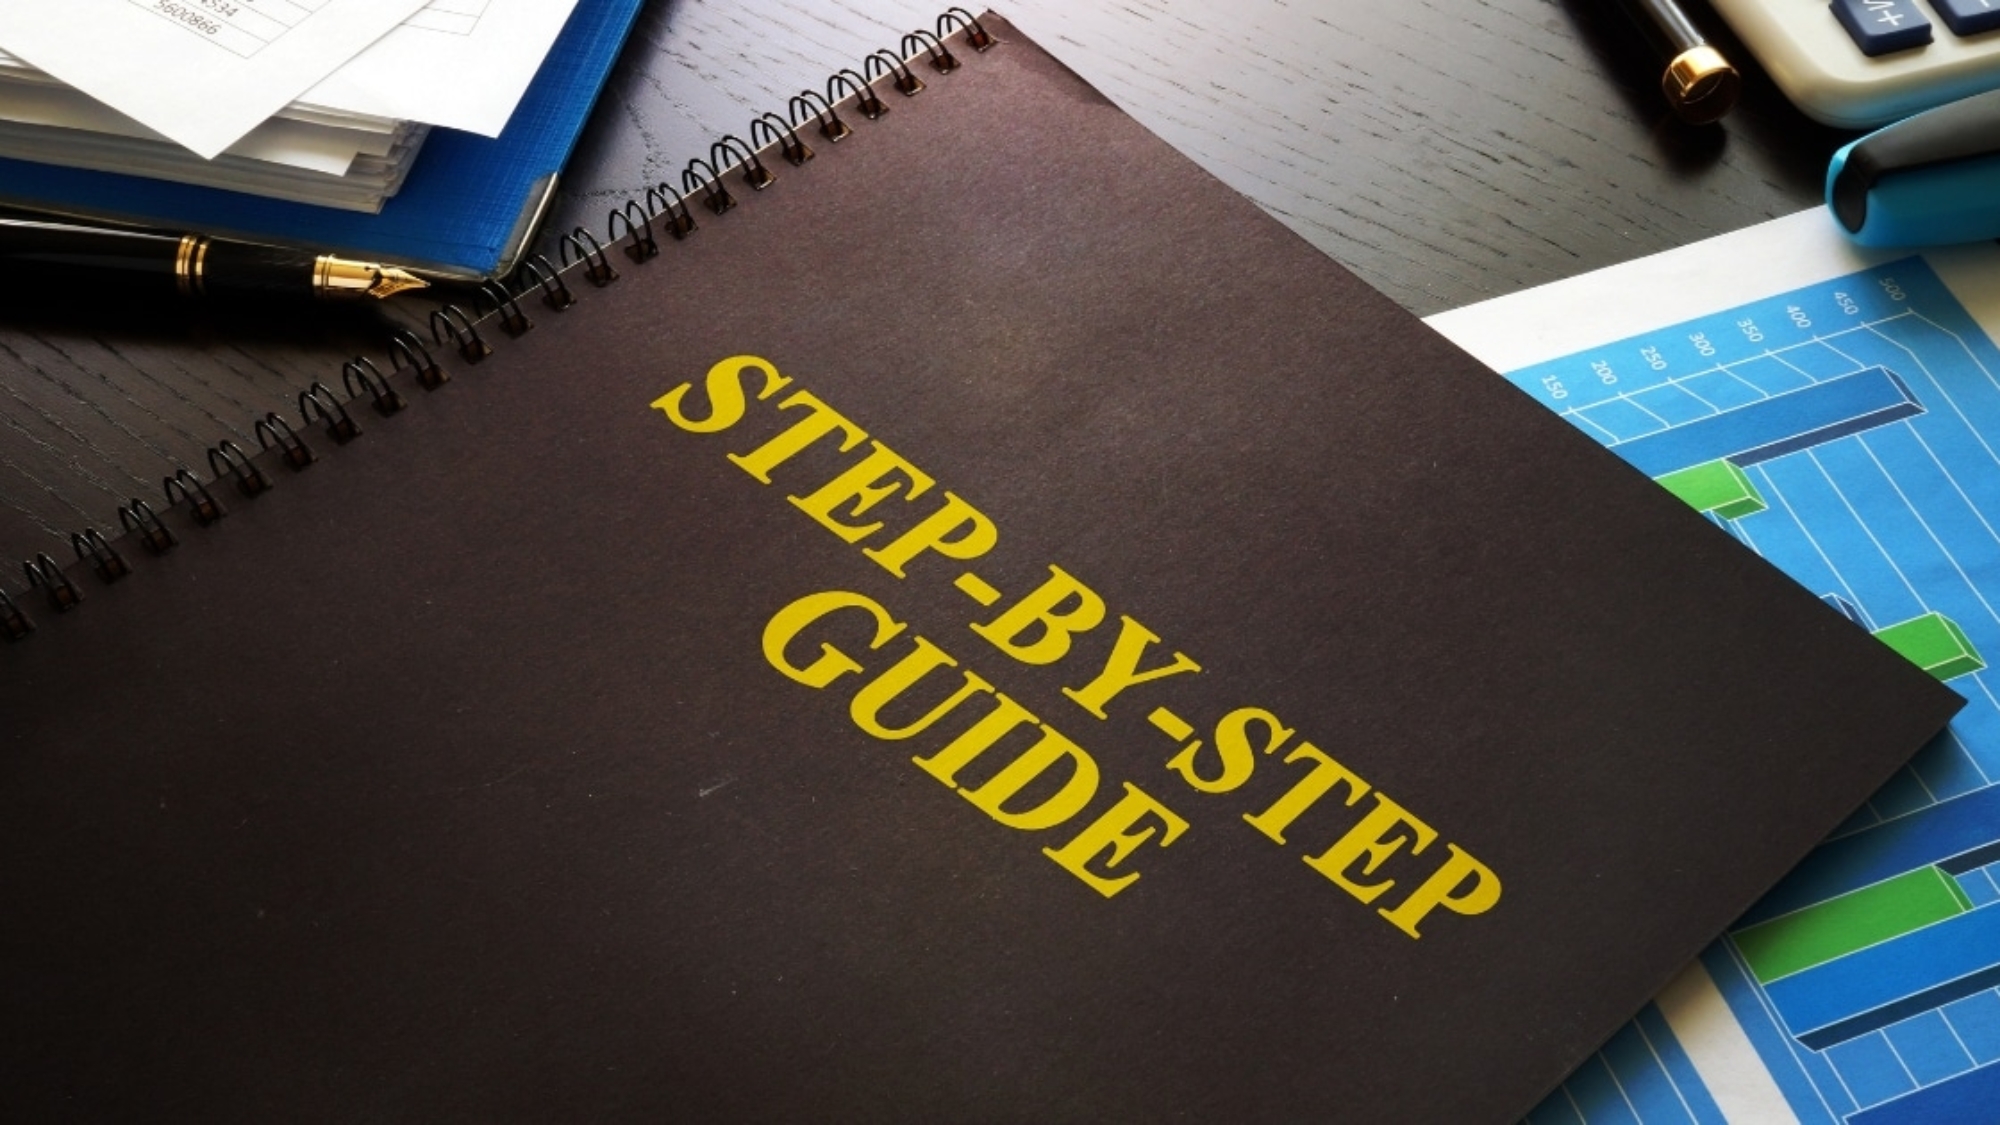 Step By Step Franchise Consulting - Proven 5 Tips for Success